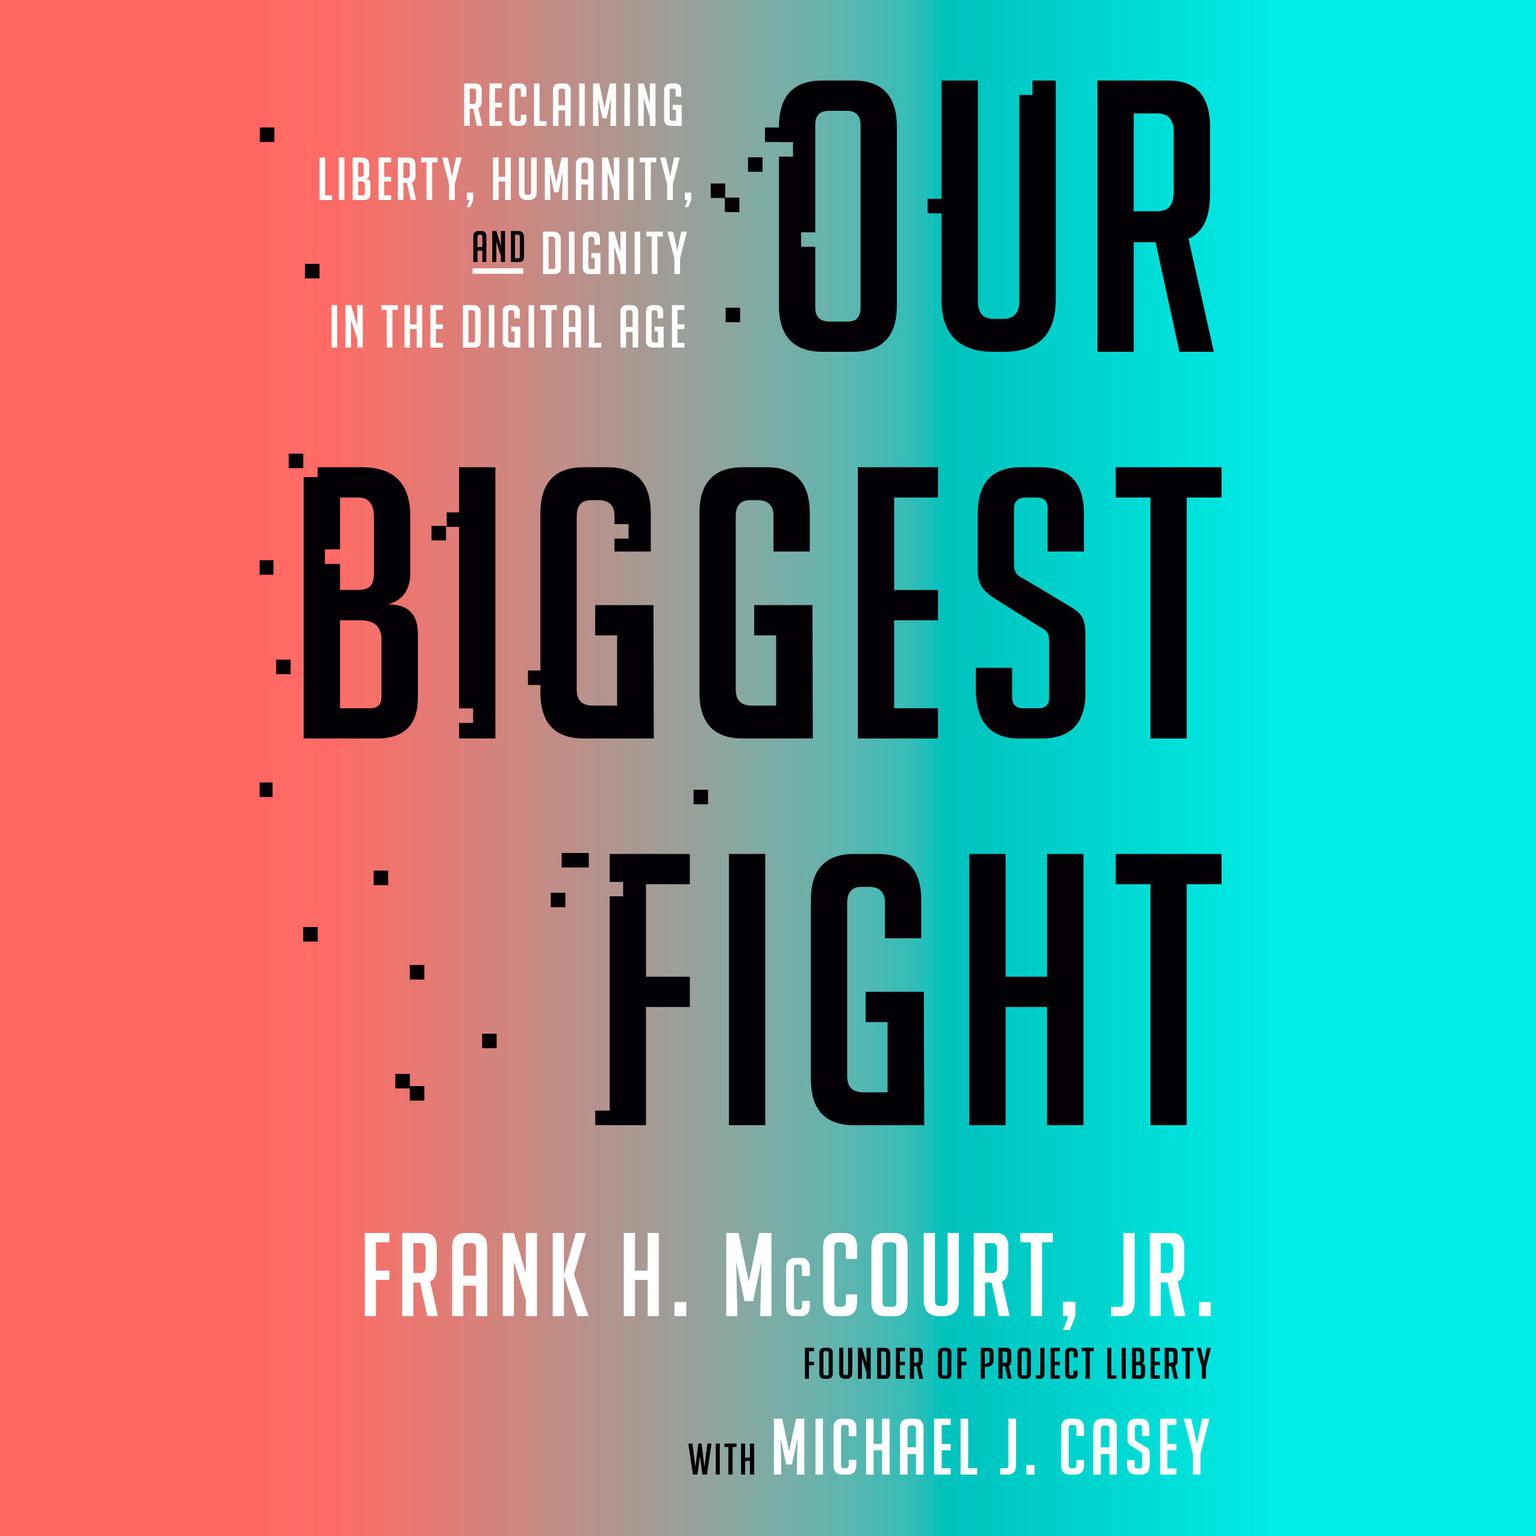 Our Biggest Fight: Reclaiming Liberty, Humanity, and Dignity in the Digital Age Audiobook, by Frank H. McCourt